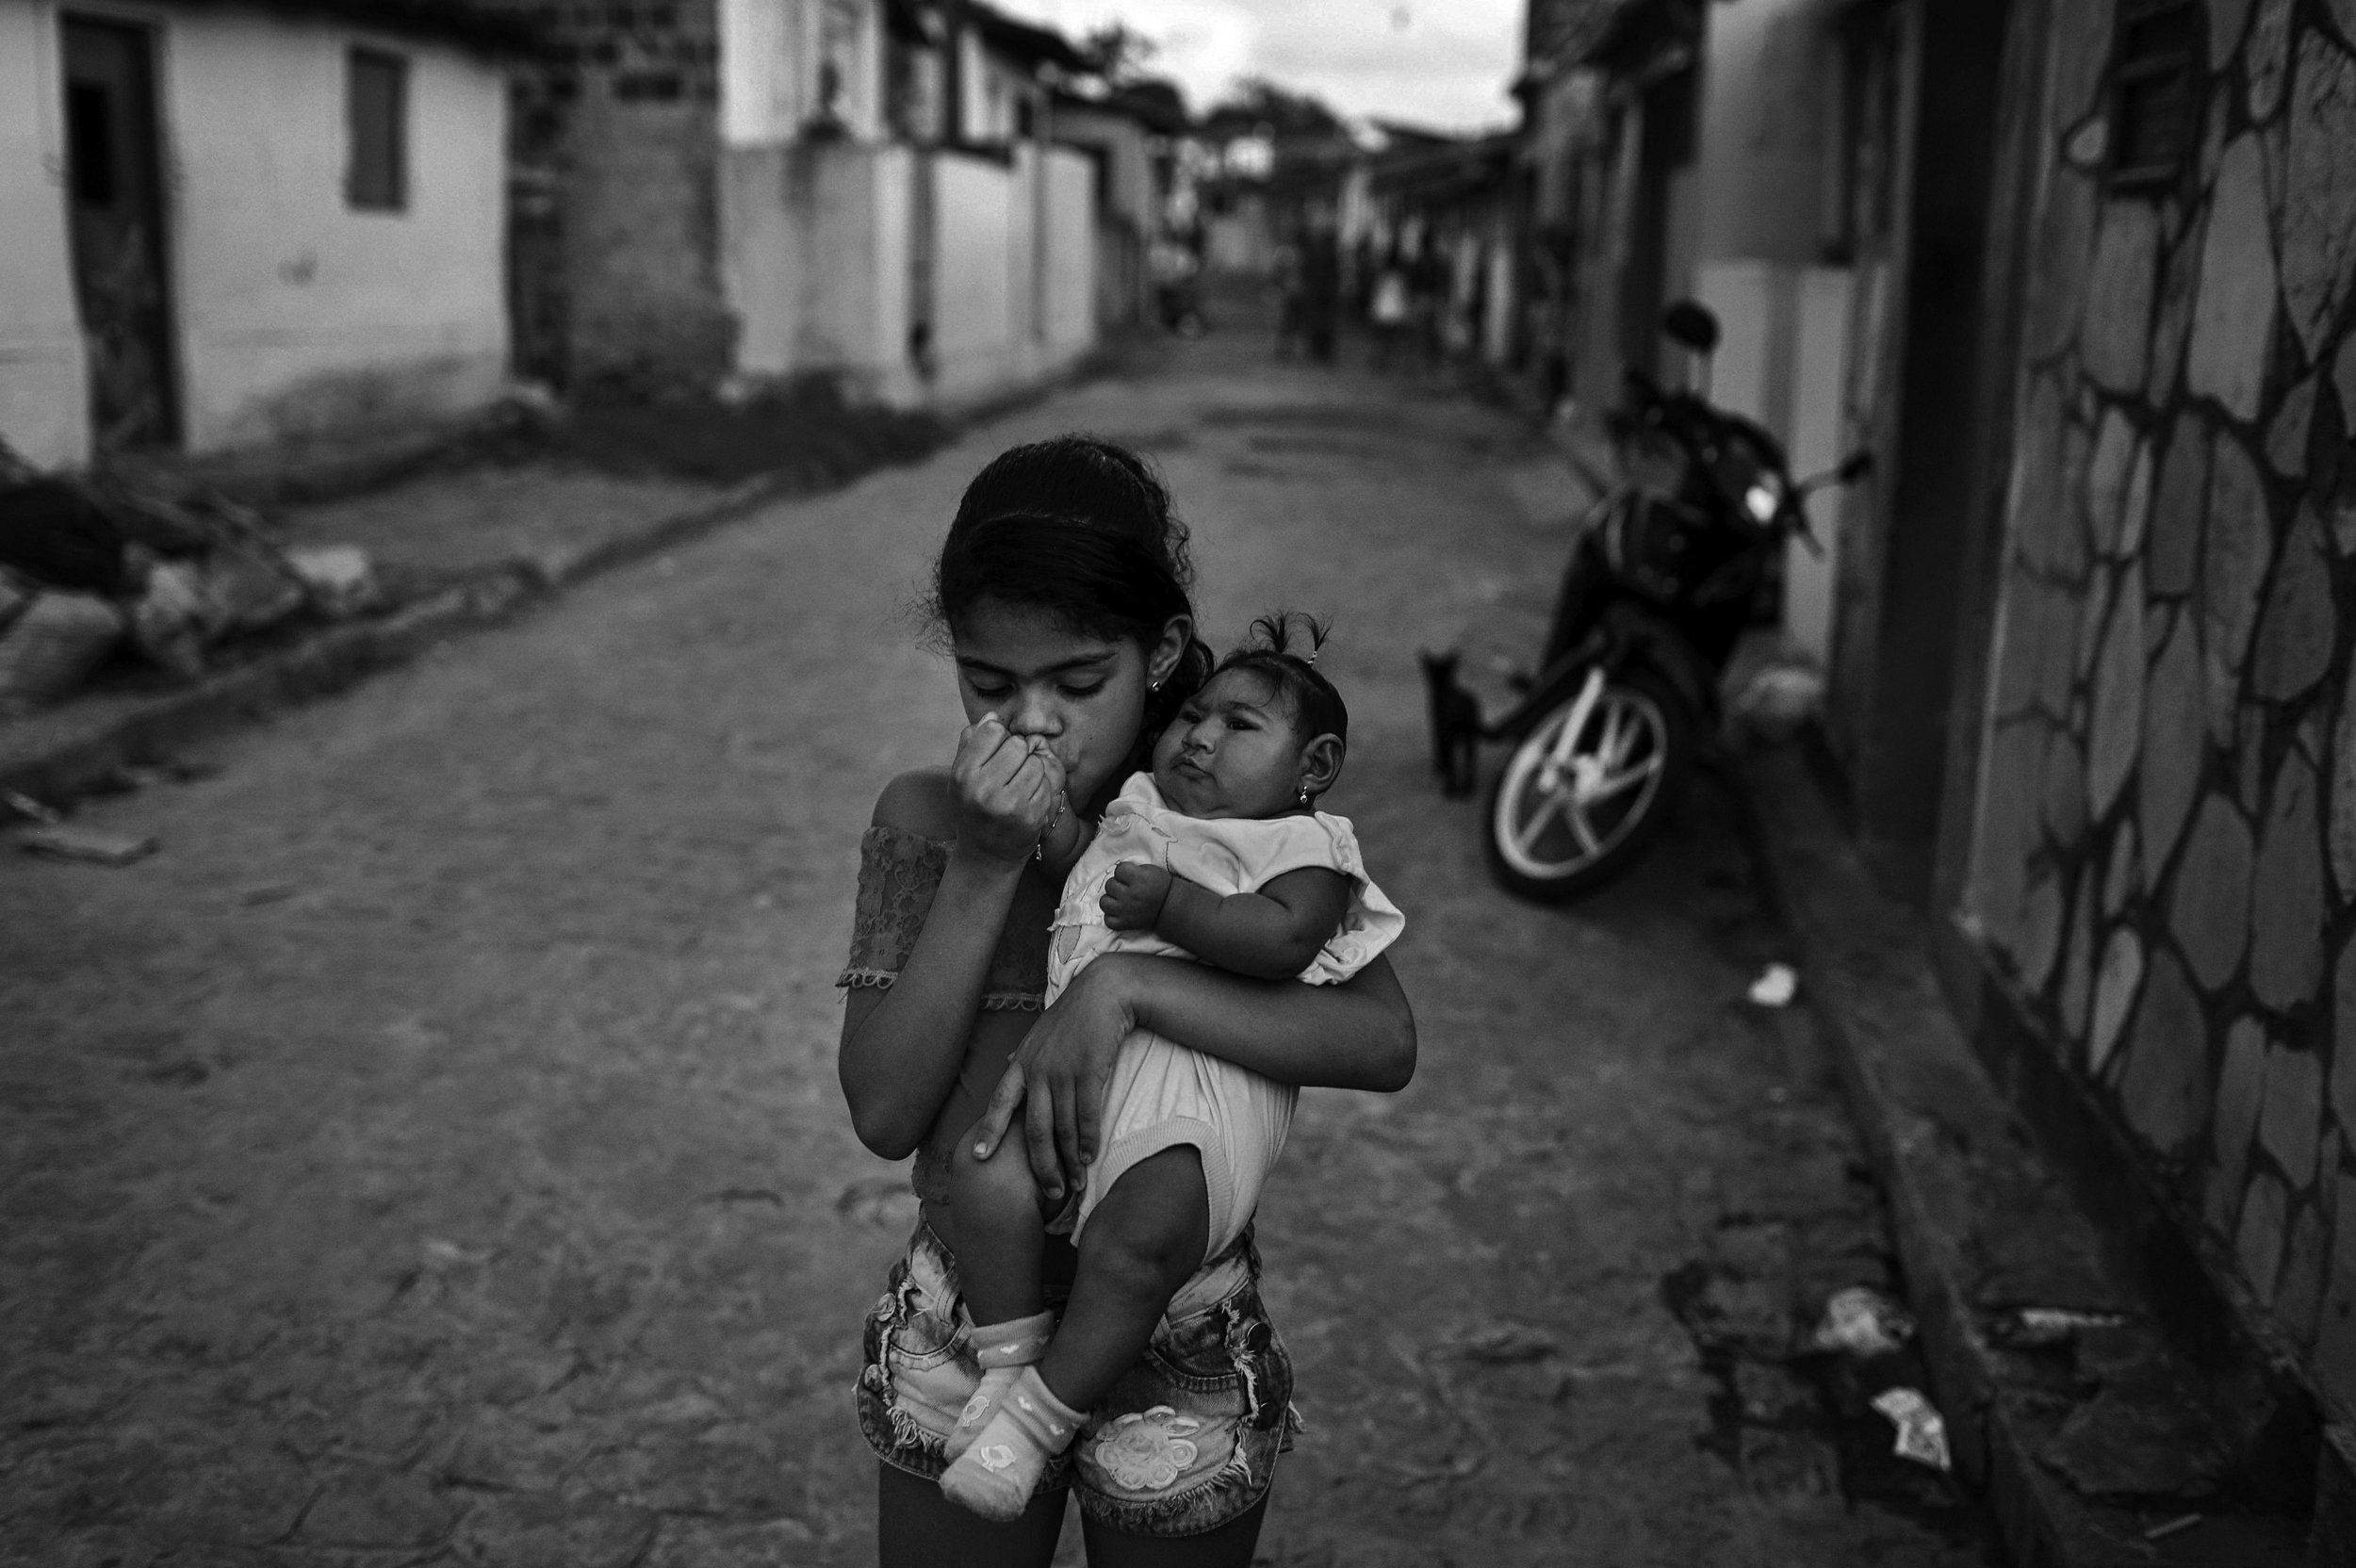  Evellyn Mendes Santos, age 9, kisses her baby sister, Heloyse, who was born with microcephaly, outside of their home in Joao Pessoa, Brazil. “My biggest dream was to have two girls,” their mother, Maria da Luz Mendes Santos, said.    